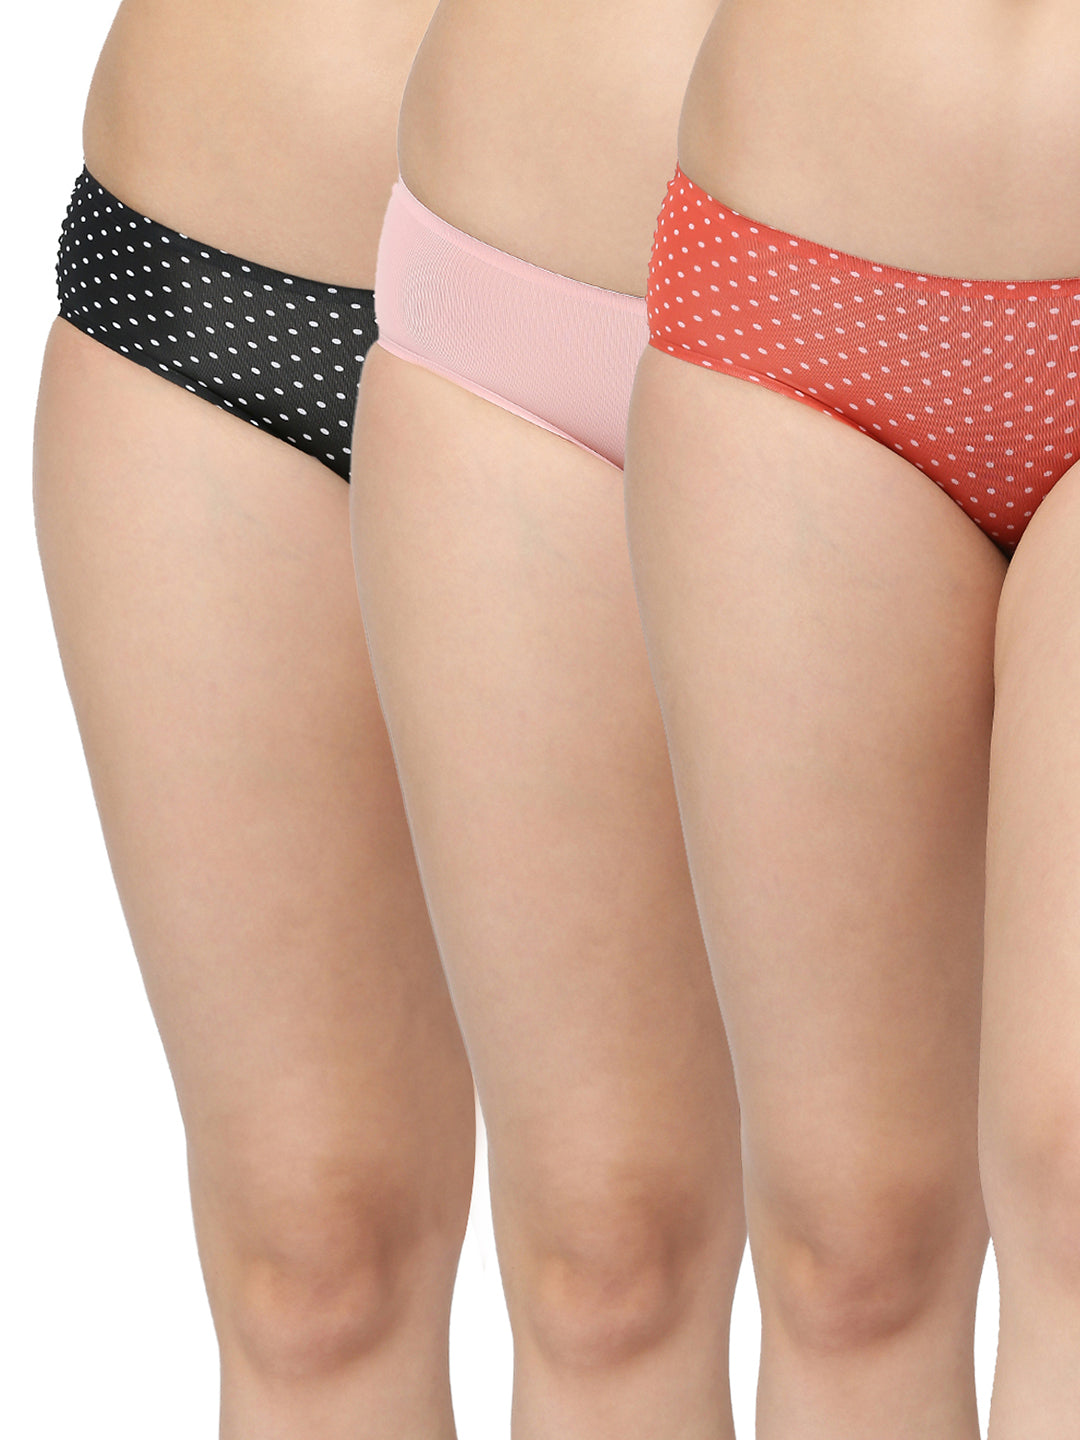 Hipster Panties - Buy Hipster Underwear for Women in India